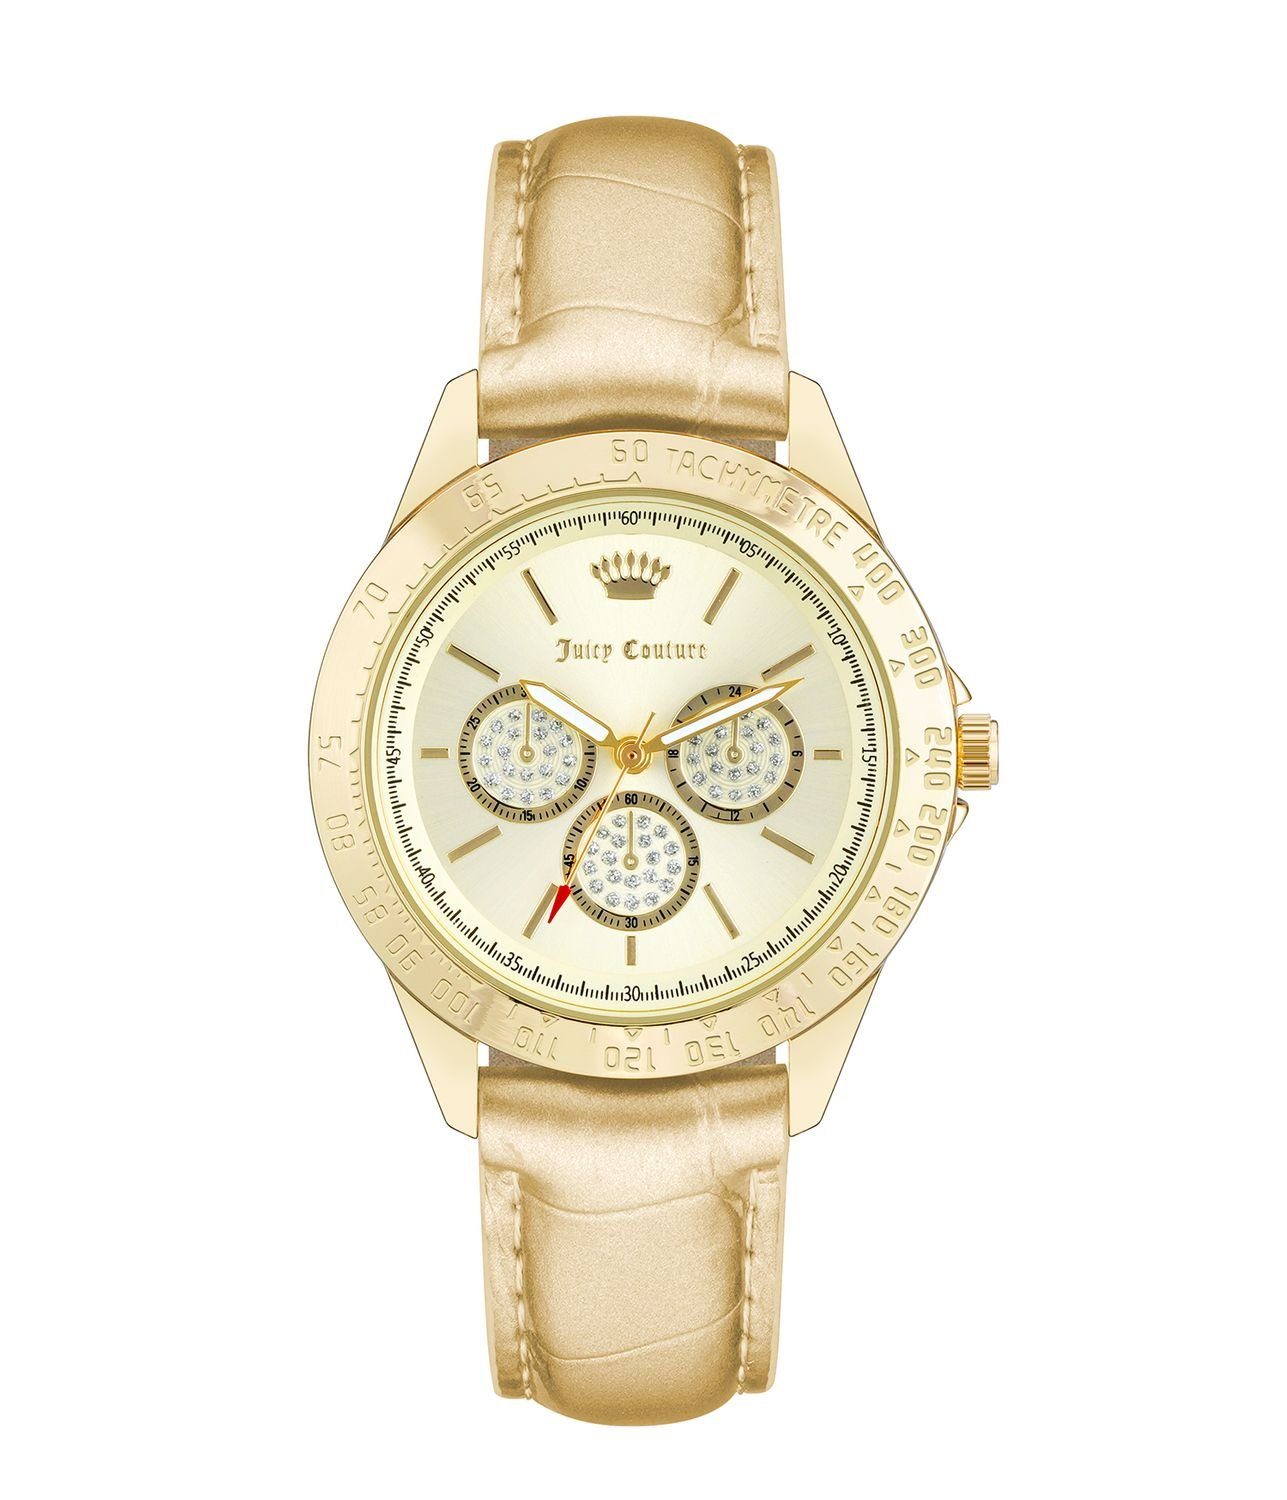 Juicy Couture Digitaluhr JC/1220GPGD